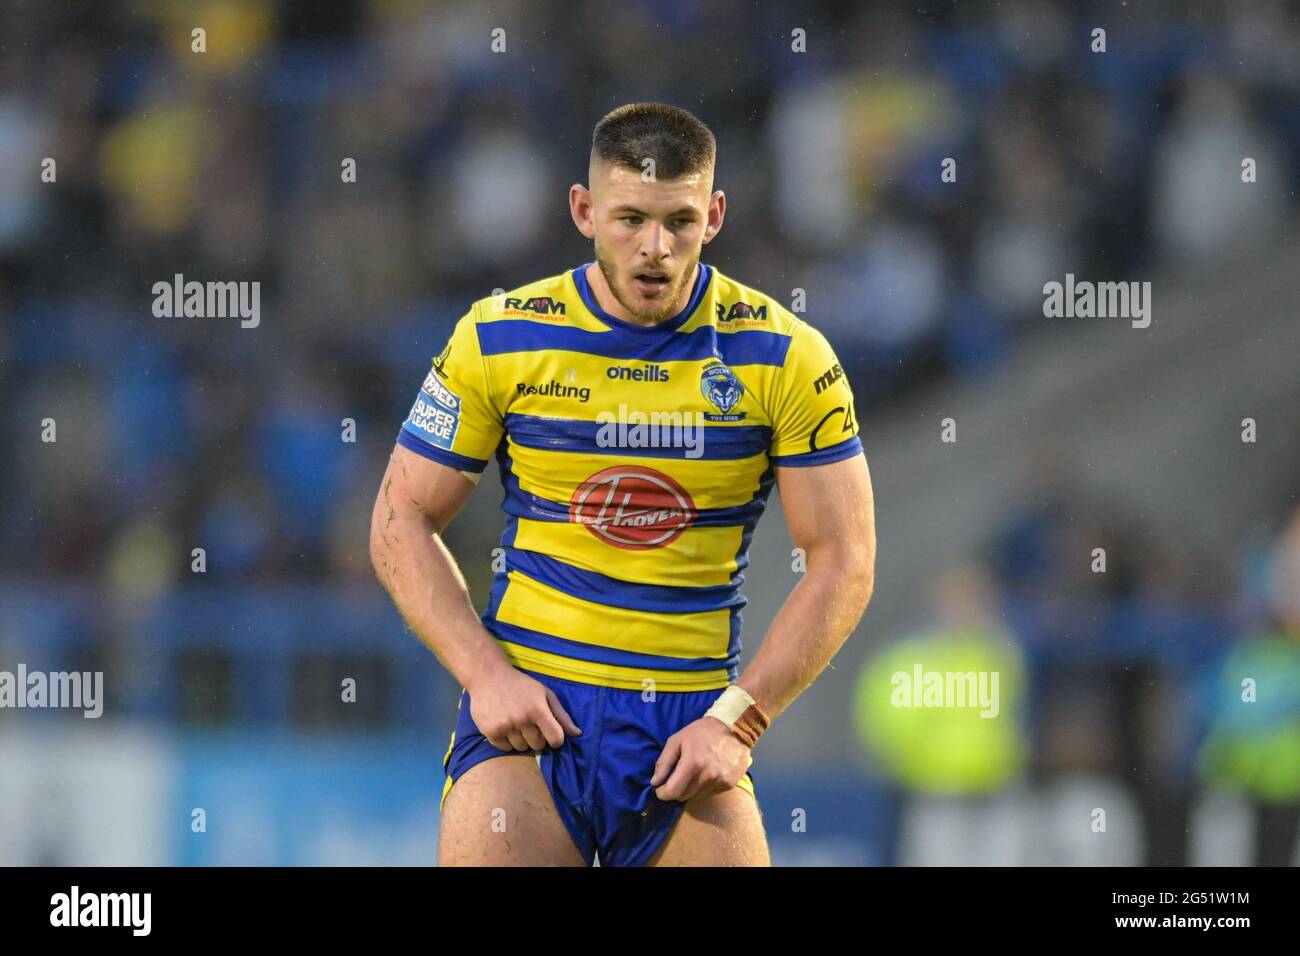 Danny Walker (16) of Warrington Wolves in action during the game Stock Photo